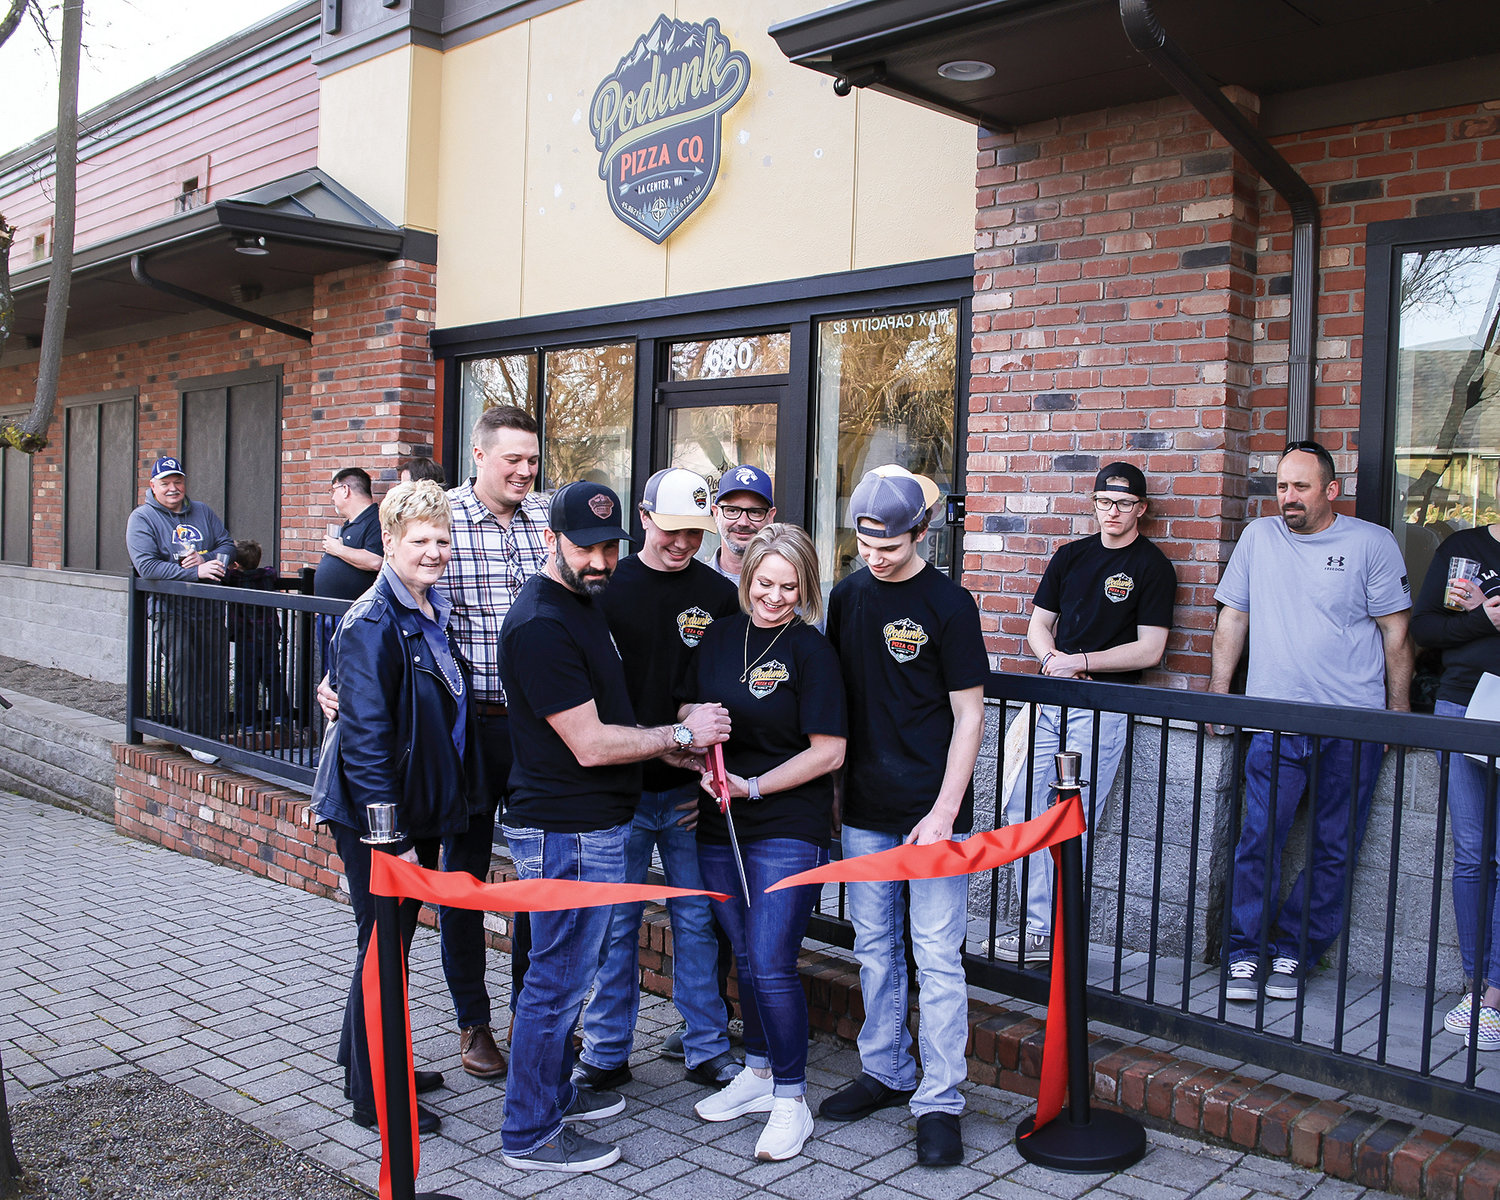 The ribbon at Podunk Pizza Co. is cut by owners Tosha and Anthony Emerson, a husband and wife duo, during the grand opening event for the business in La Center on Saturday, March 18.